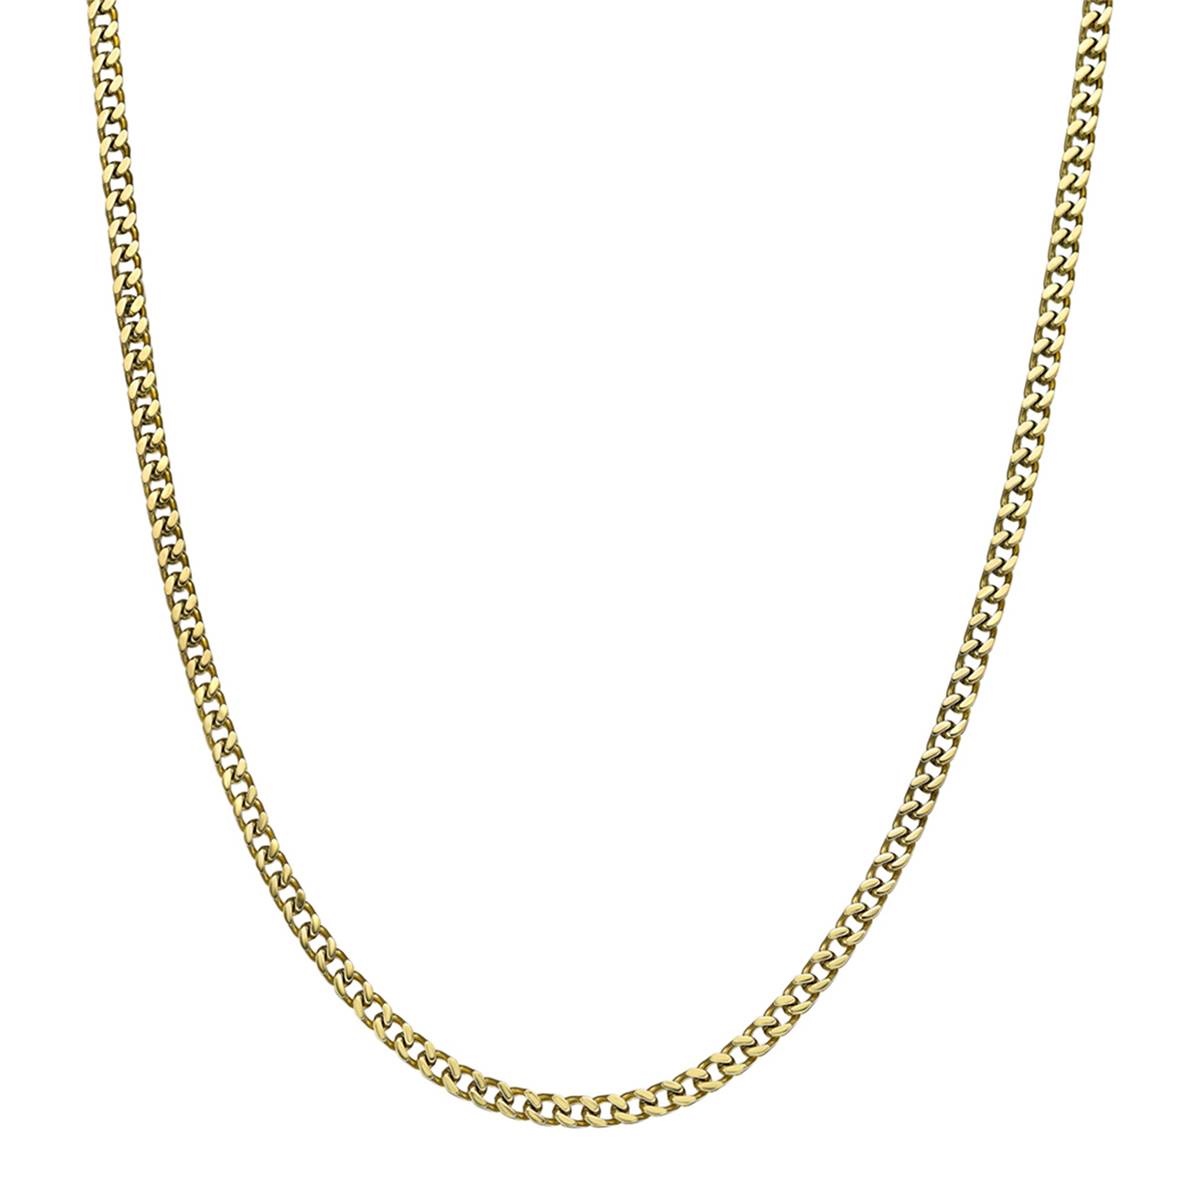 Mens Lynx Stainless Steel Thin Foxtail Chain Necklace